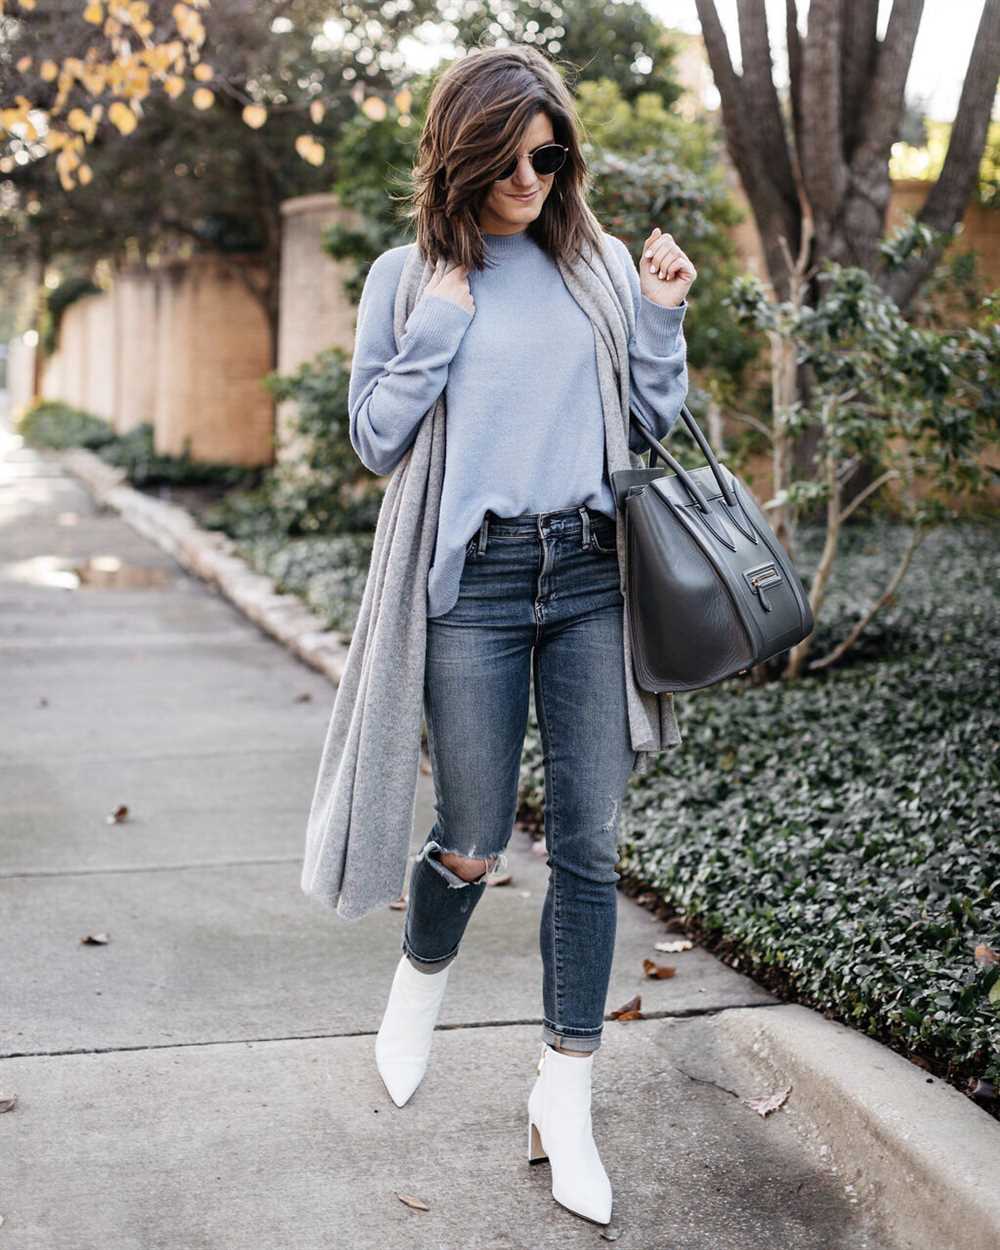 Creating a monochromatic look with white boots